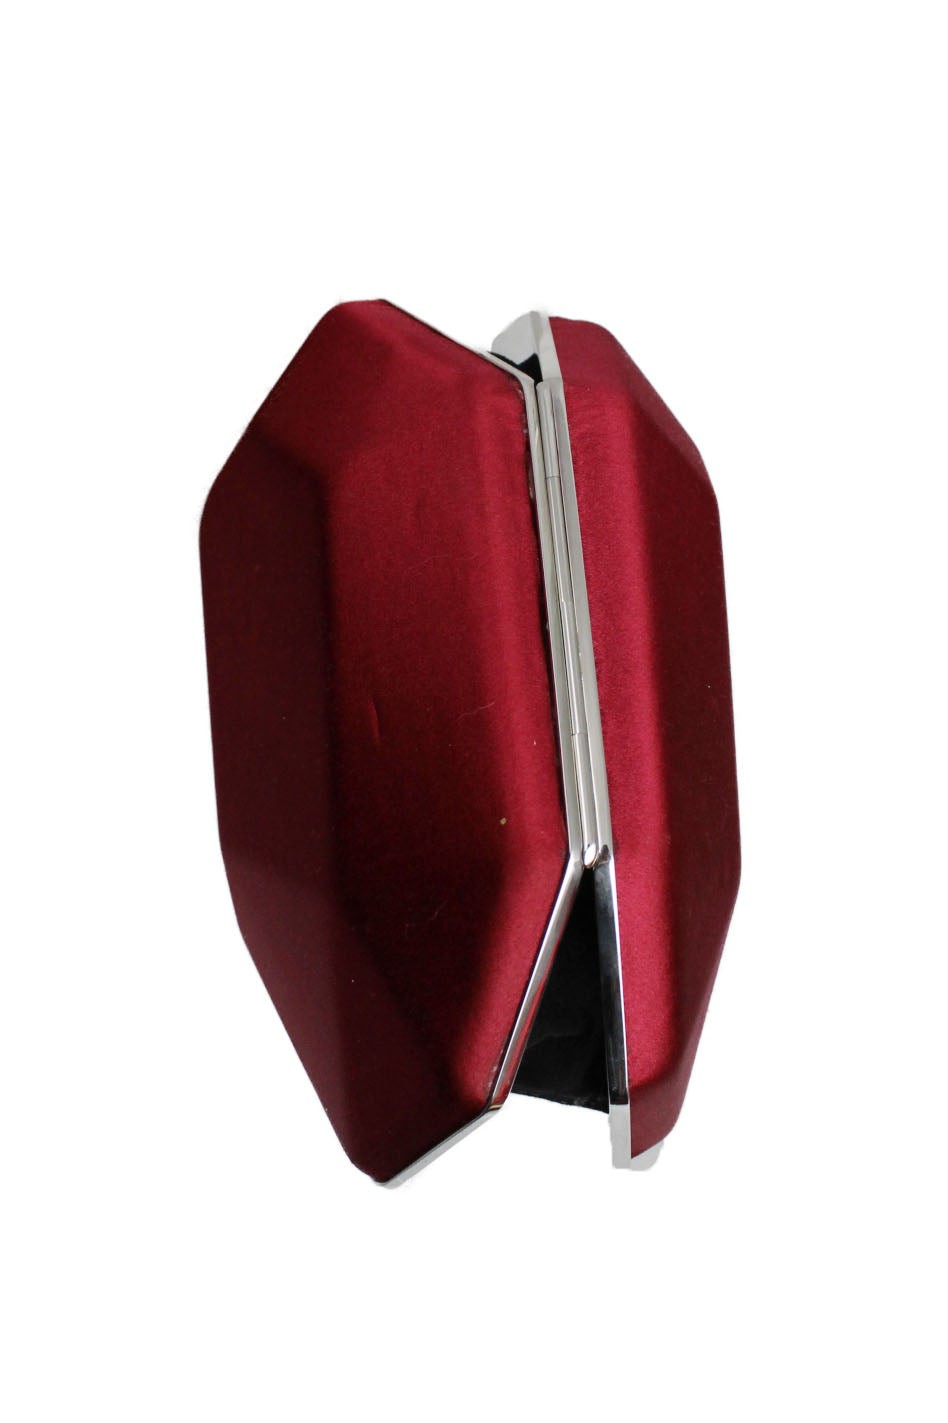 atelier swarvoski ss19 clutch. features asymmetrical geometric silhouette with red satin. silver trim and internal black fabric lining with small pocket. rhinestone on top acts as a closure release.